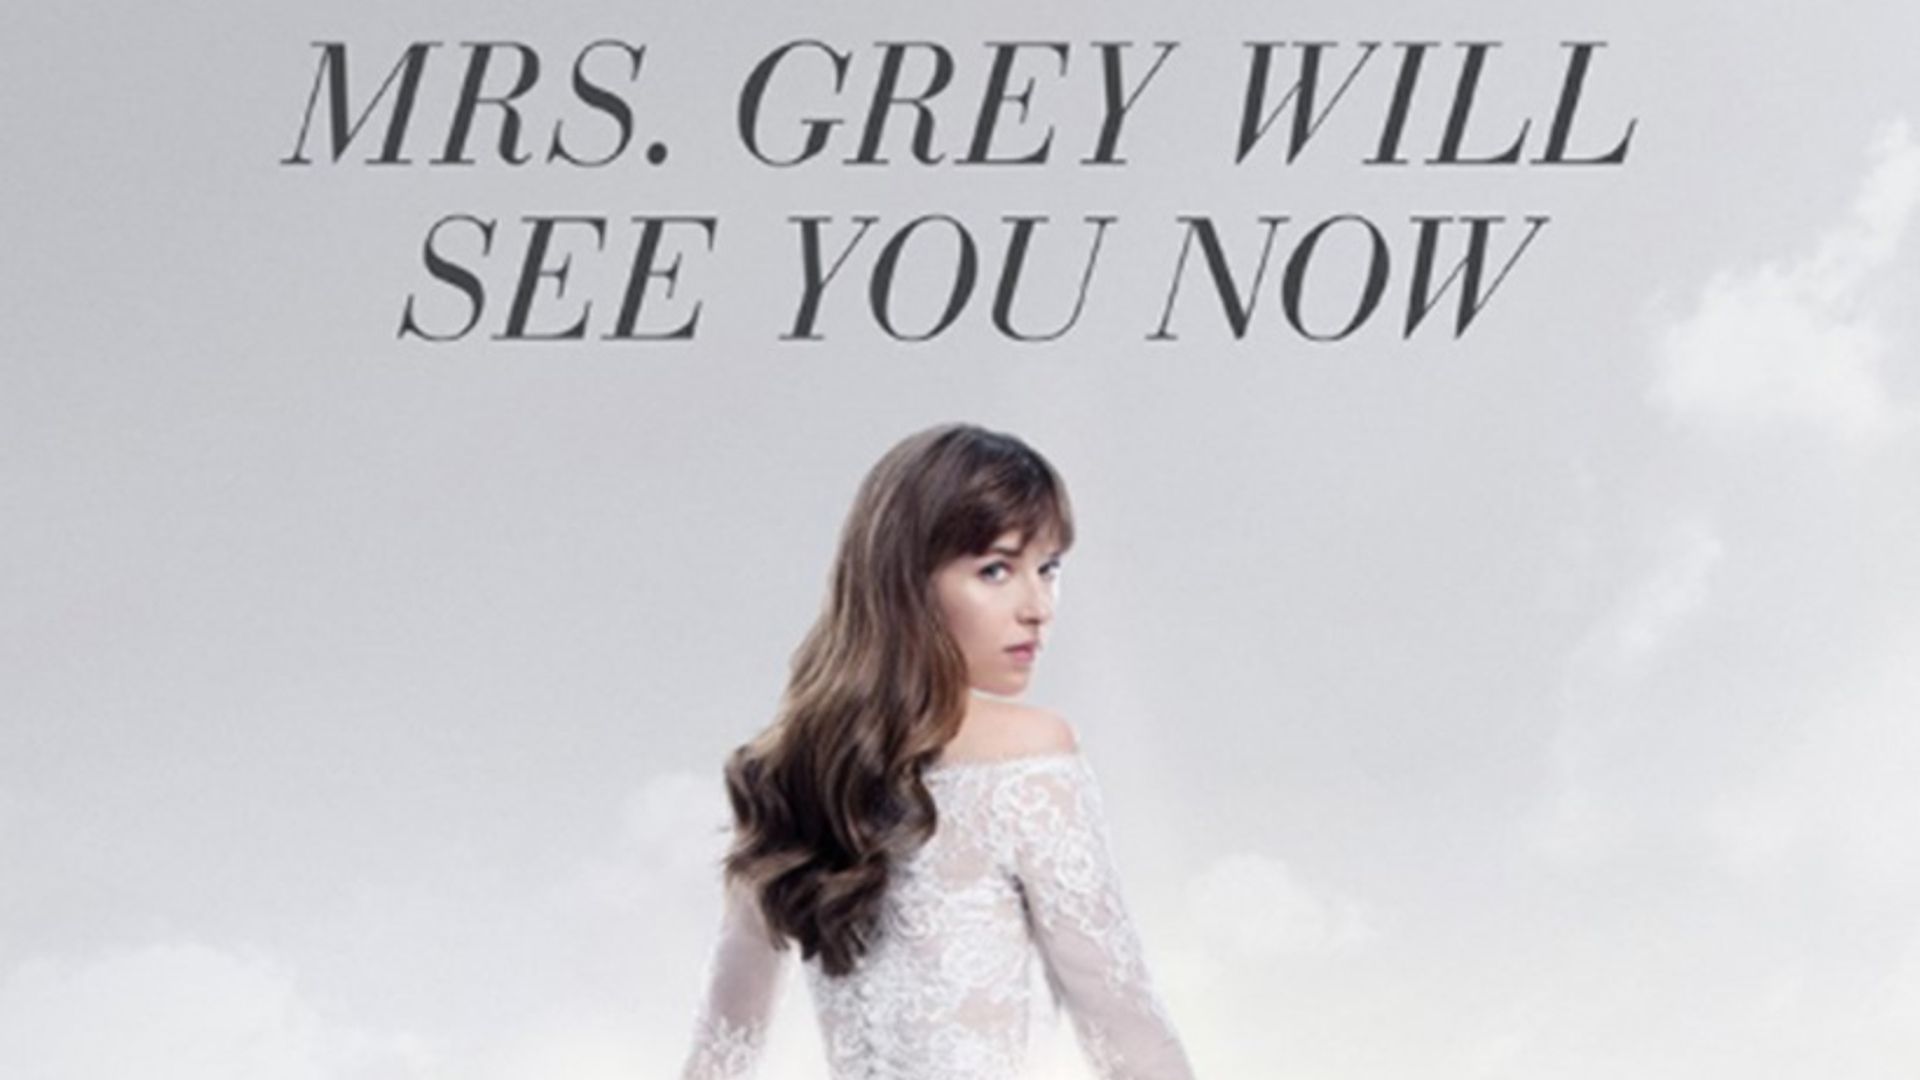 WATCH: Fifty Shades Freed trailer has finally been released